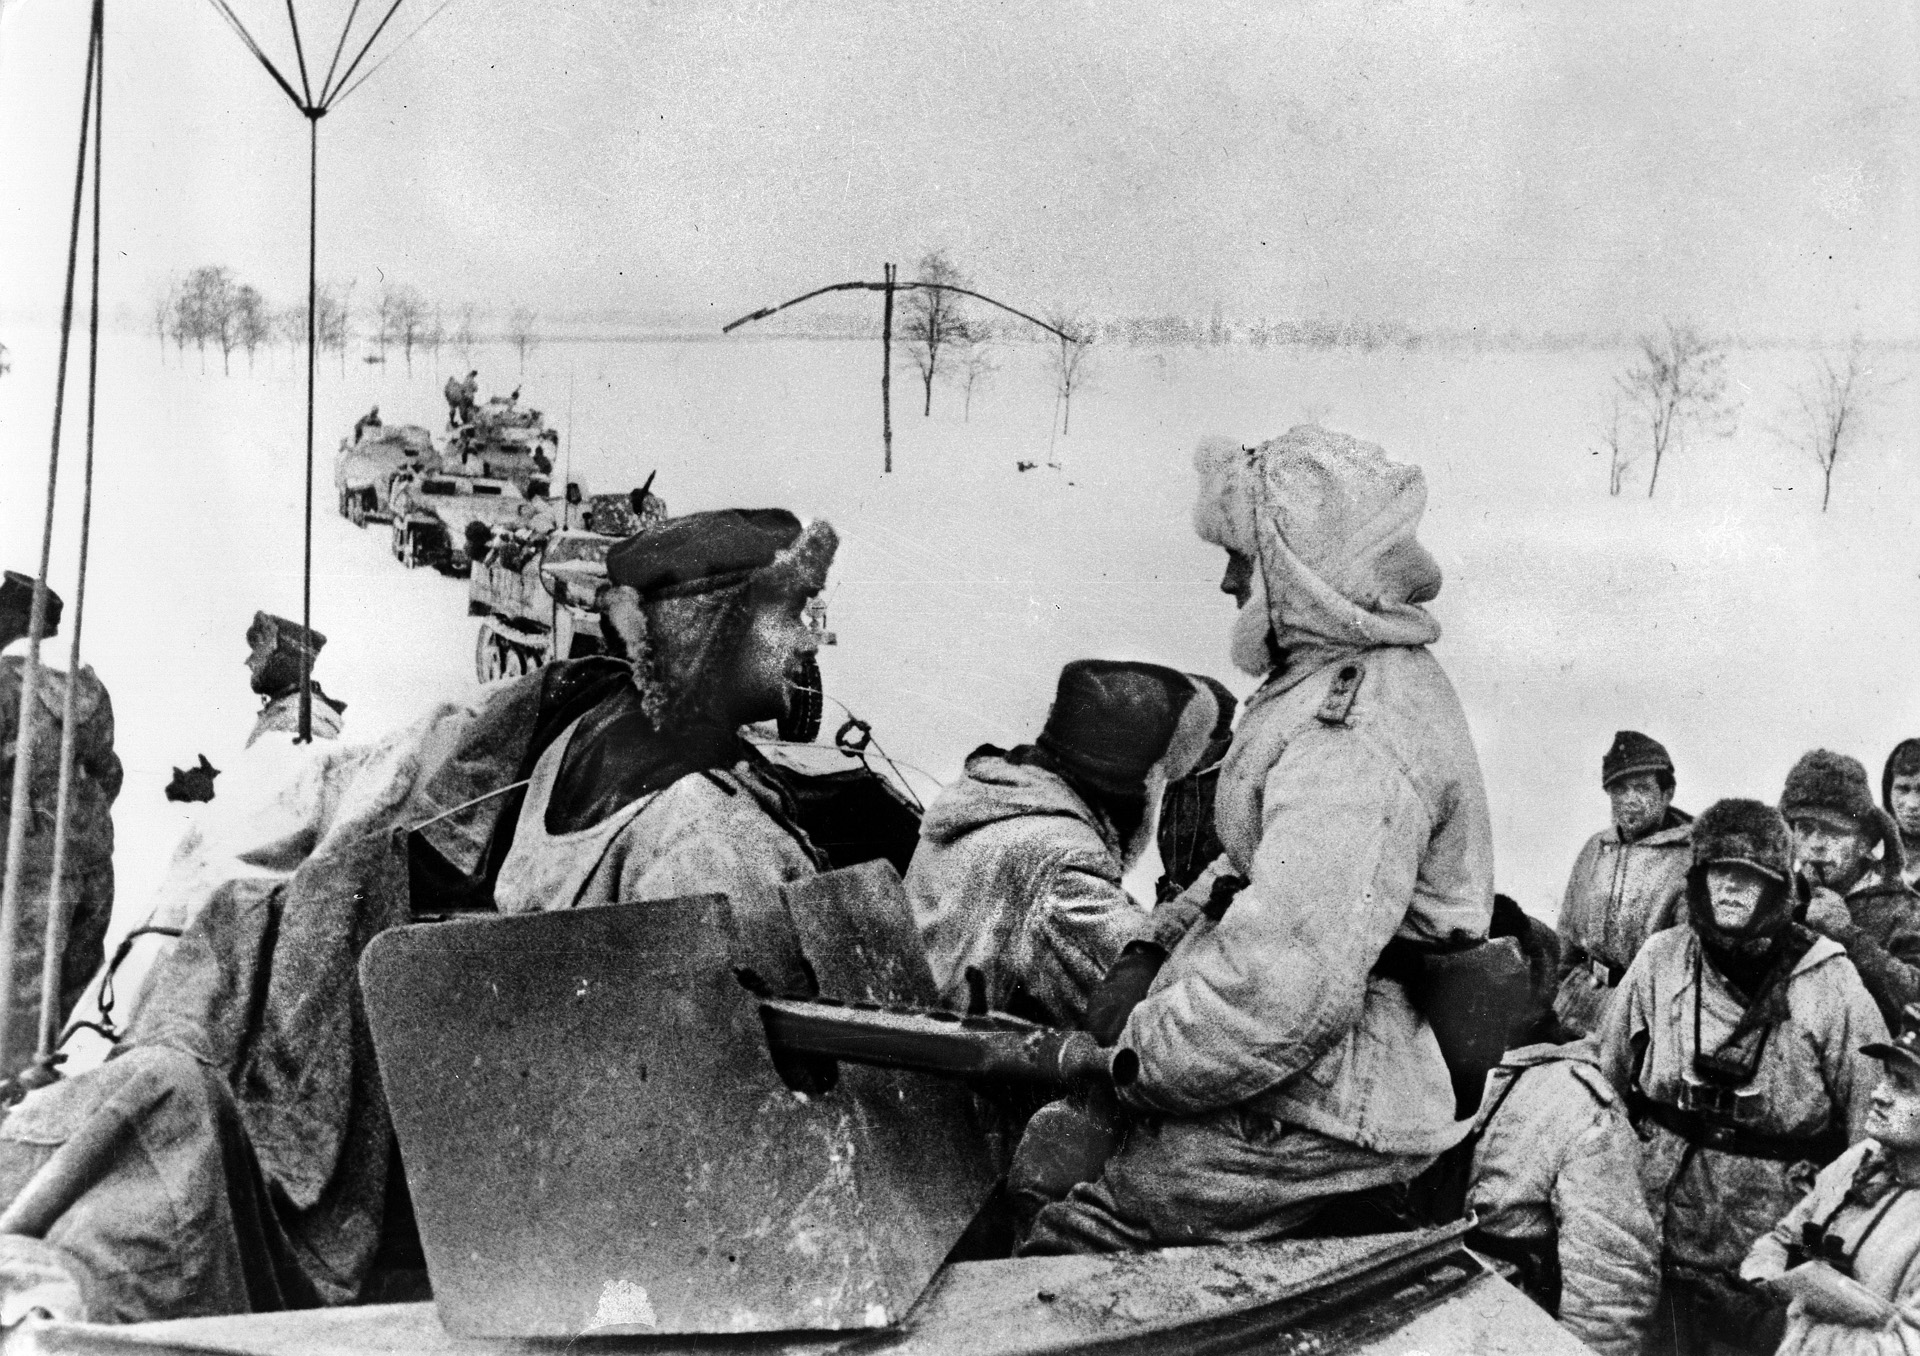 Dressed in winter combat gear to provide camouflage across the snow-covered countryside, German panzergrenadiers climb aboard halftracks in preparation for an offensive against the Soviet Red Army in the early spring of 1945. Operation Spring Awakening was devised as a means of defending access to Hungarian oil fields, which were vital to the German armed forces.